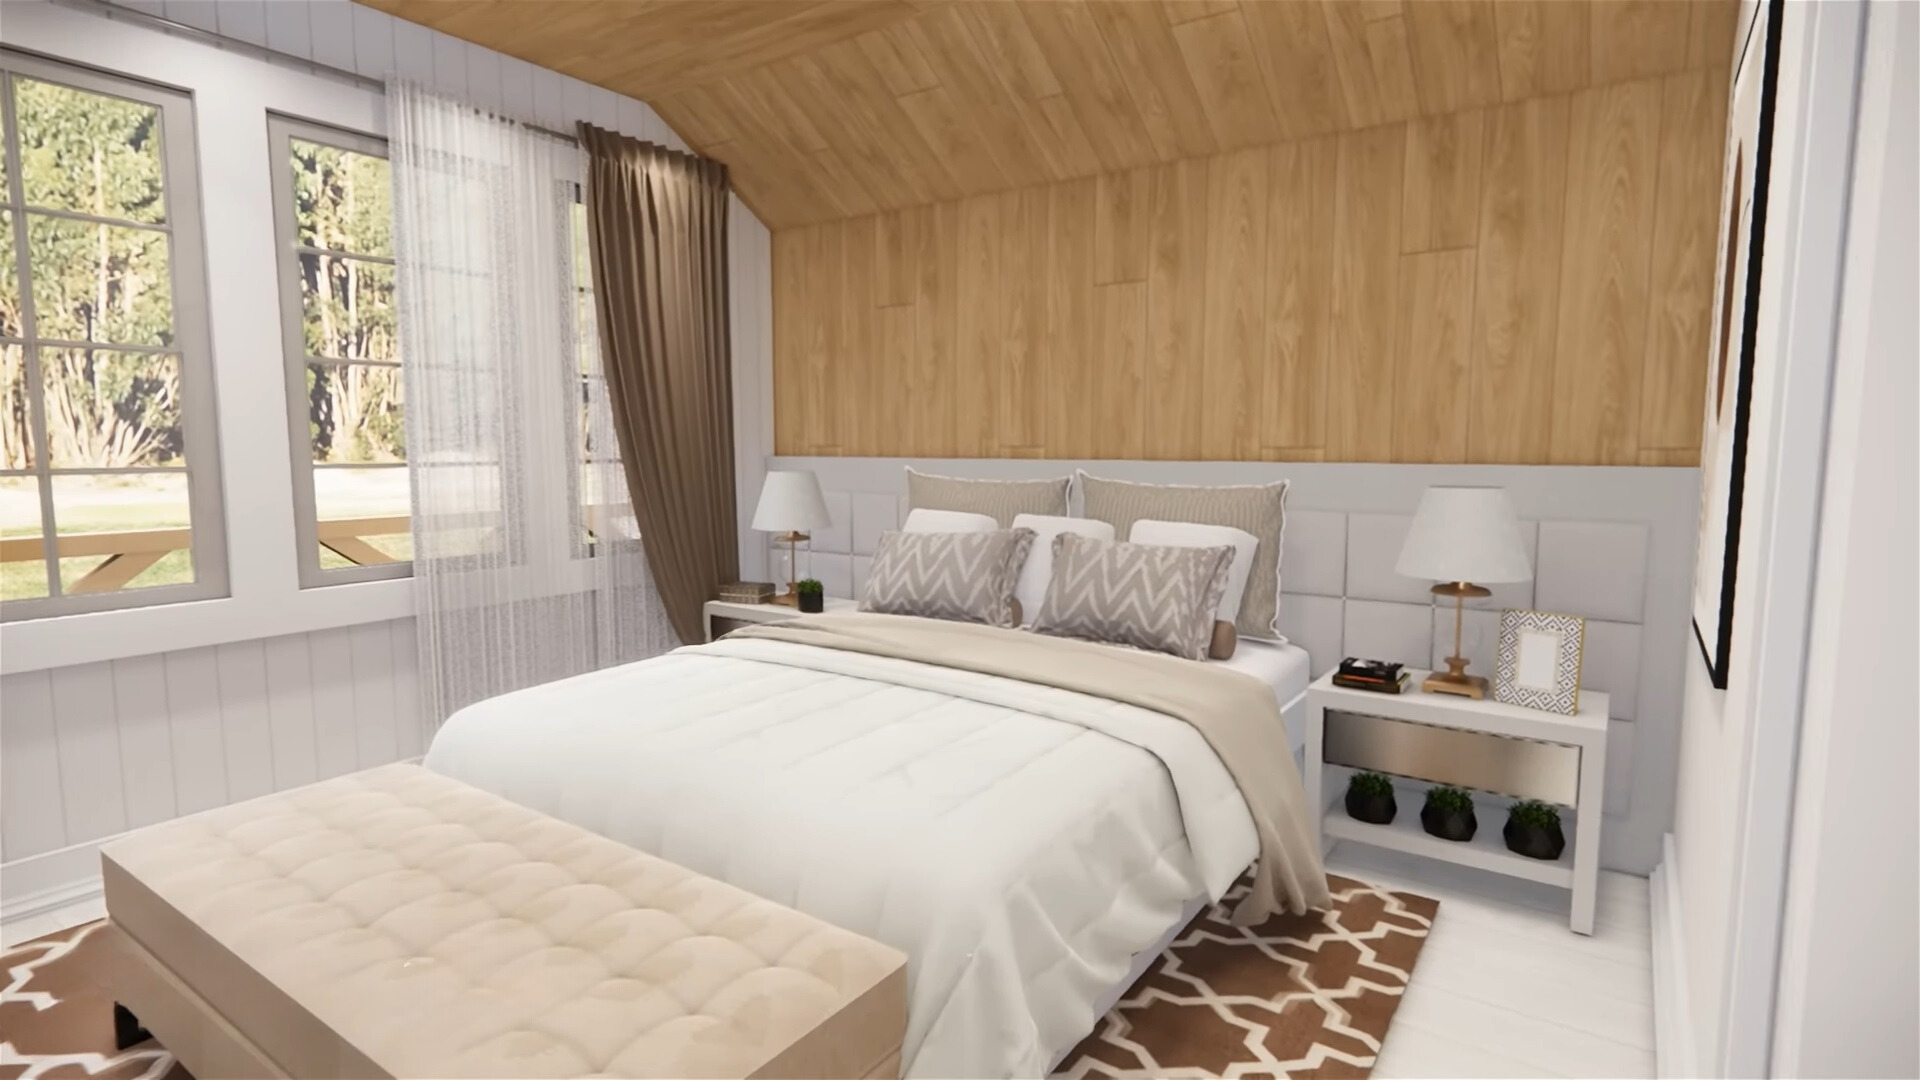 bedroom with bedside tables on both sides and lamps on them, wooden ceiling